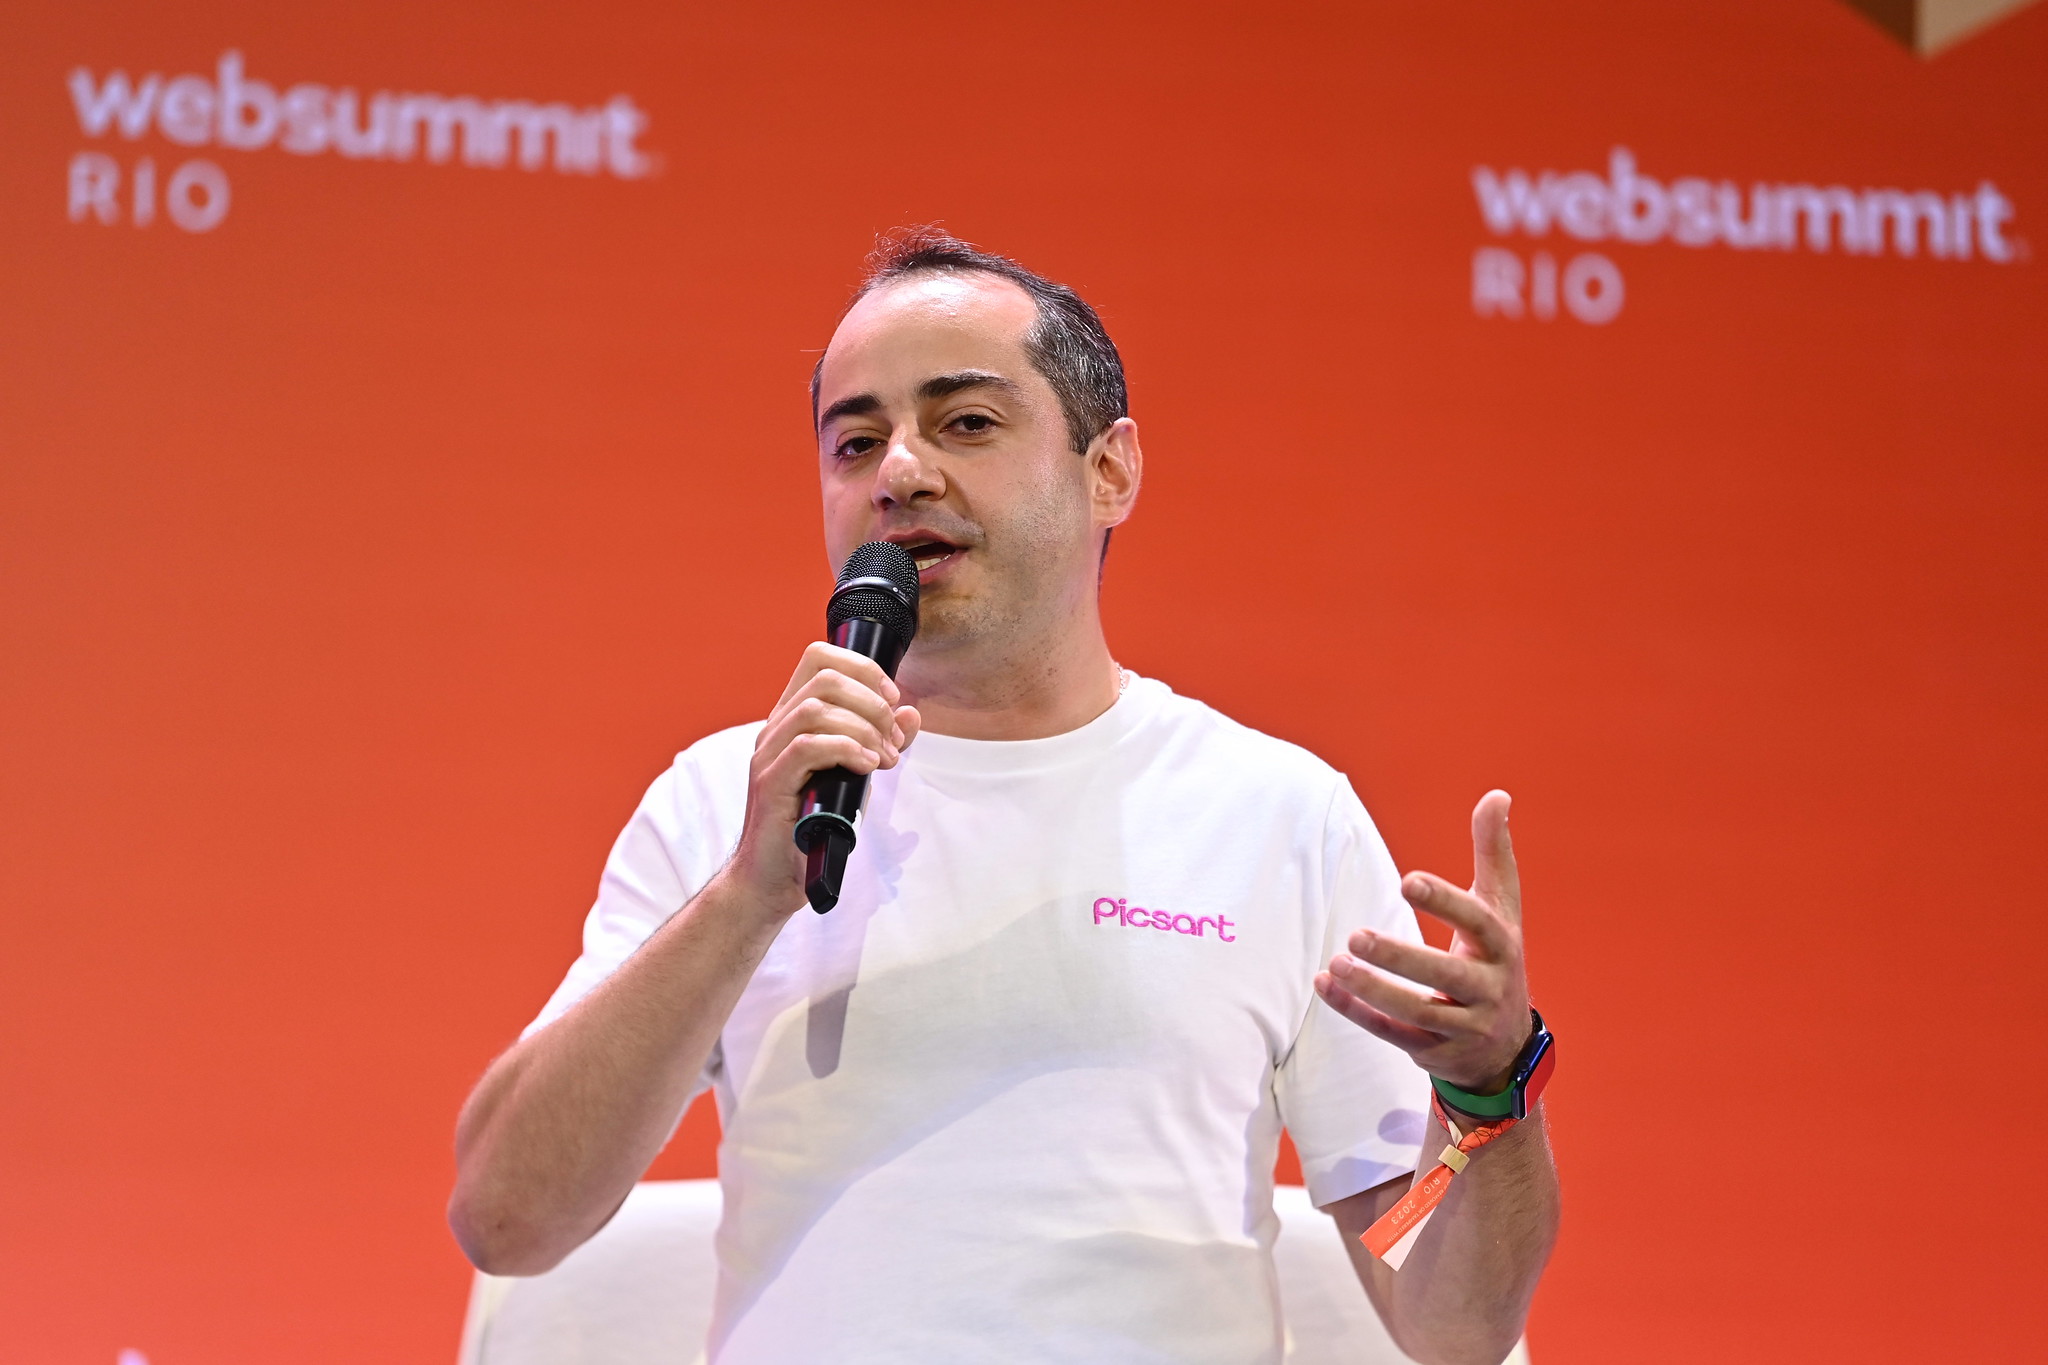 Mikayel Vardanyan, Founding Partner & Chief Product Officer, Picsart, on Creatiff Stage during day three of Web Summit Rio 2023 at Riocentro in Rio de Janeiro, Brazil.